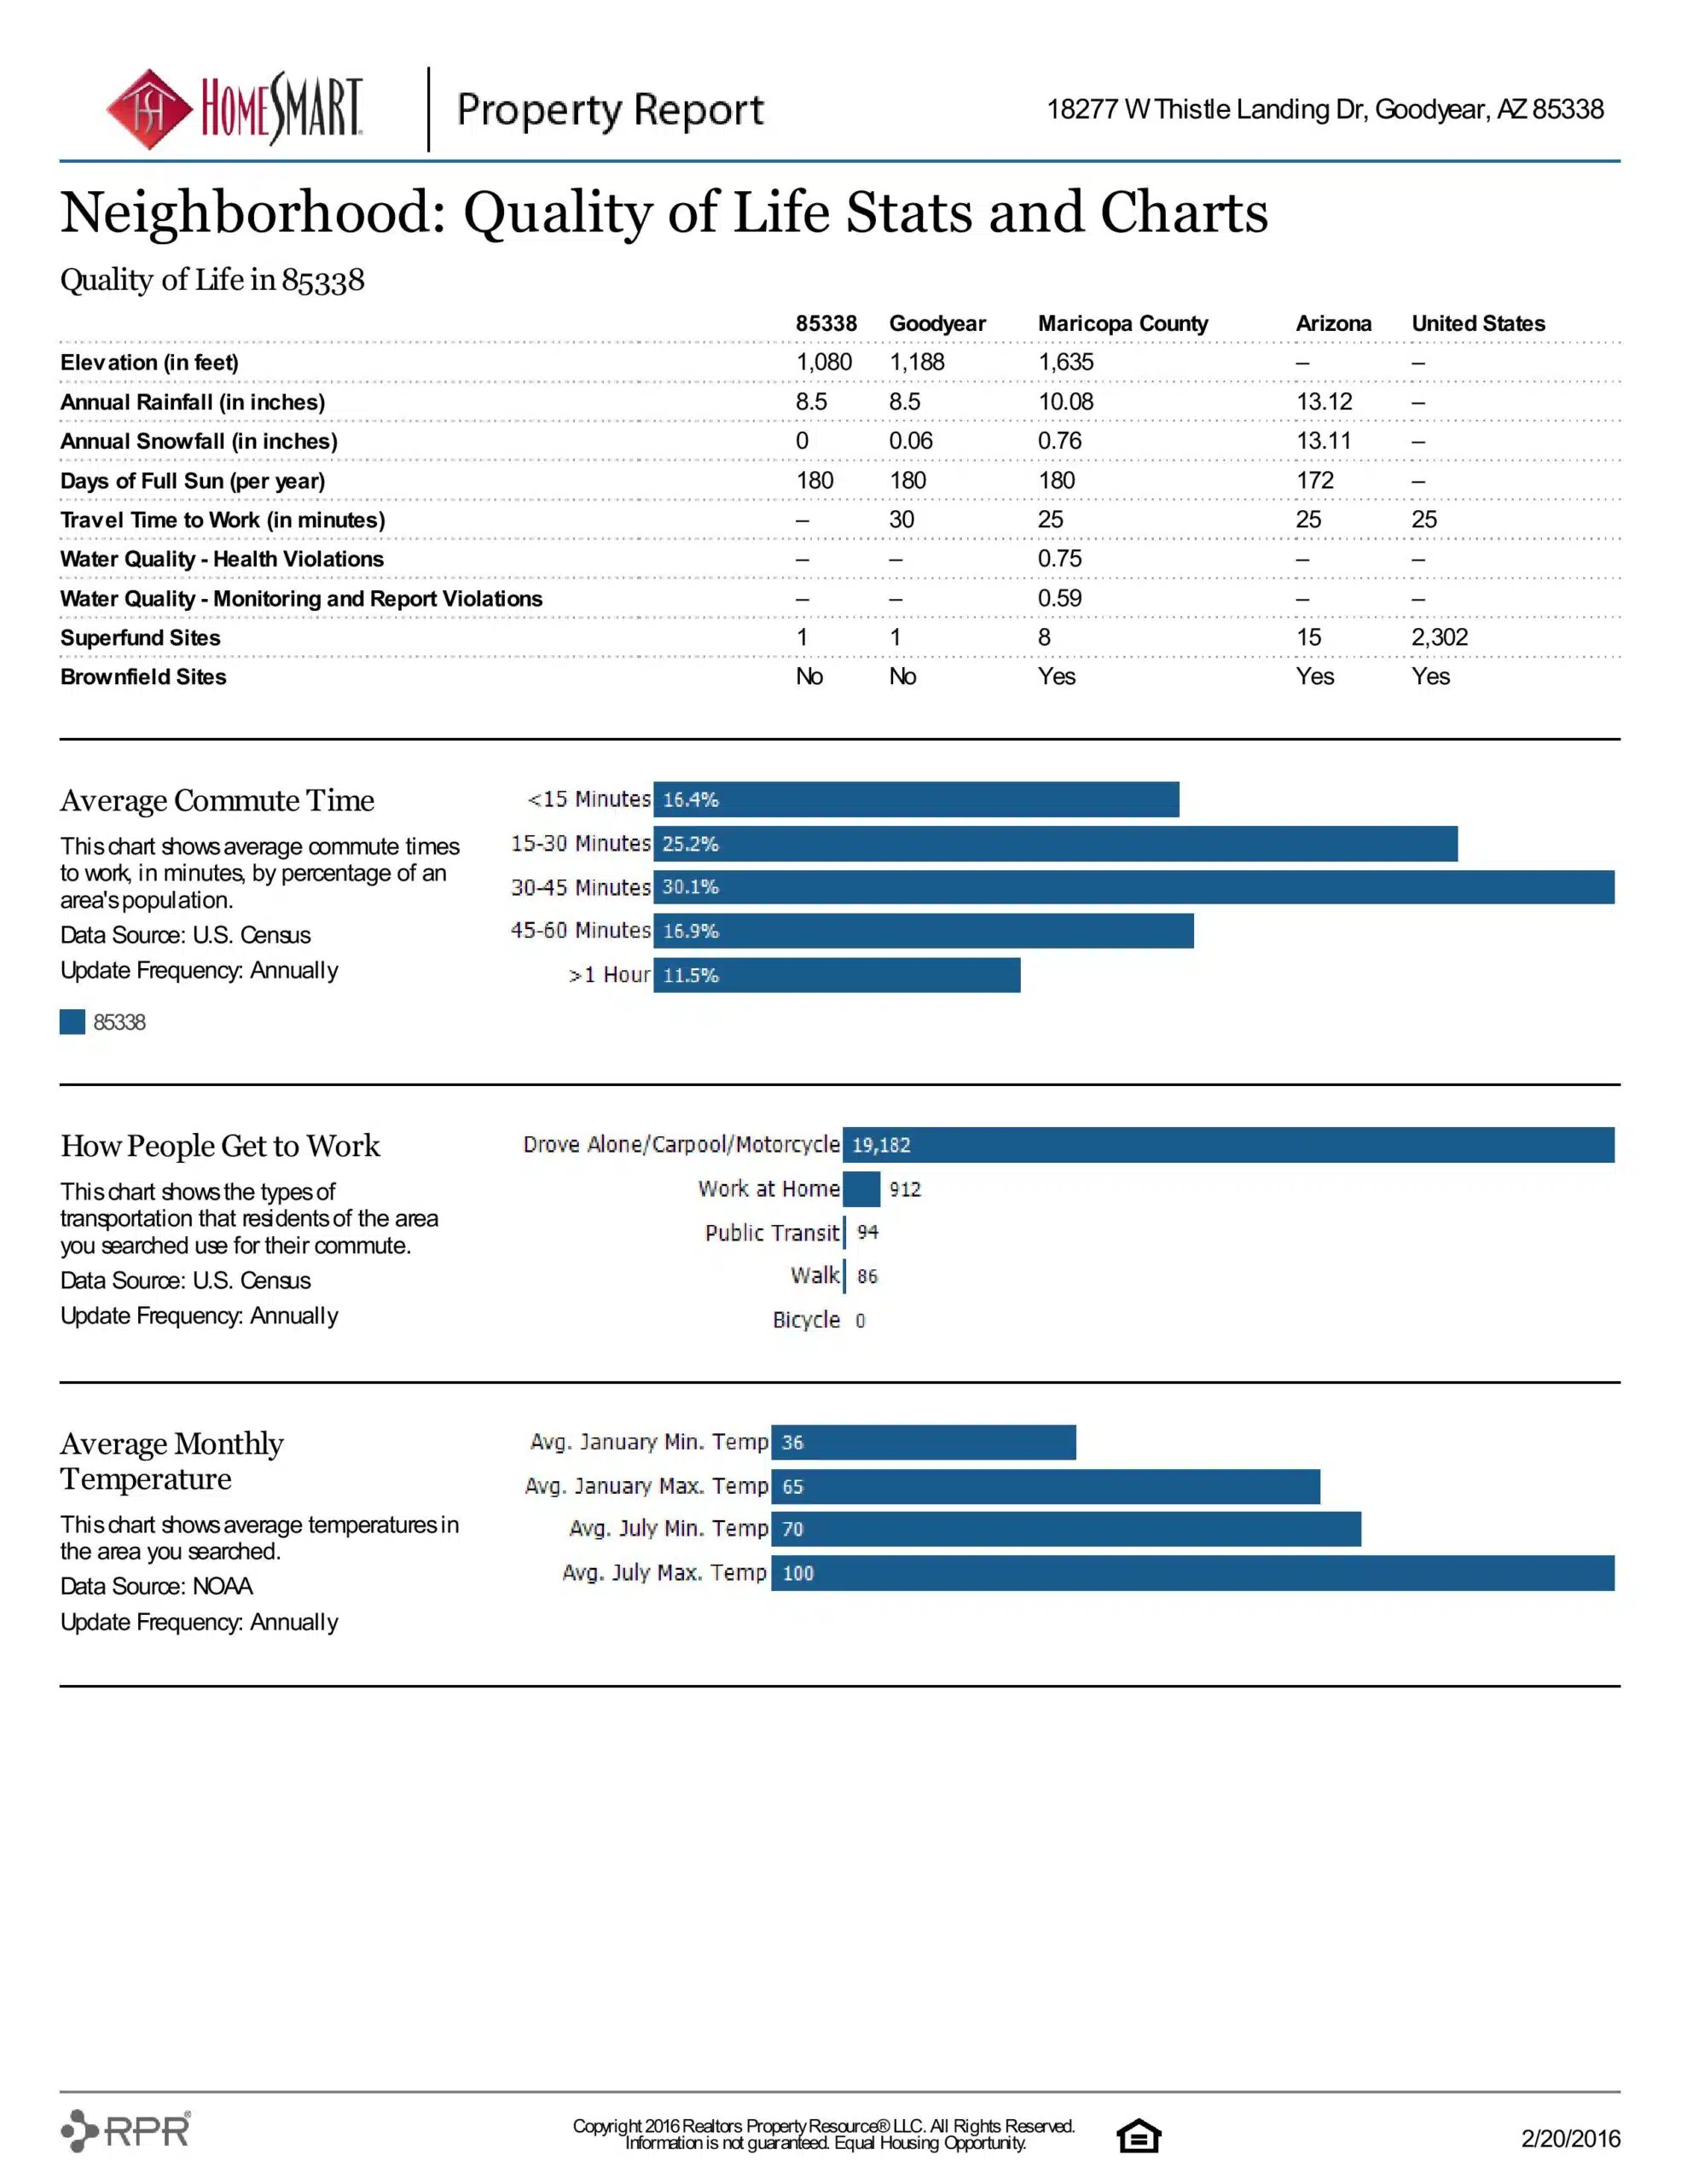 18277 W THISTLE LANDING DR PROPERTY REPORT-page-021